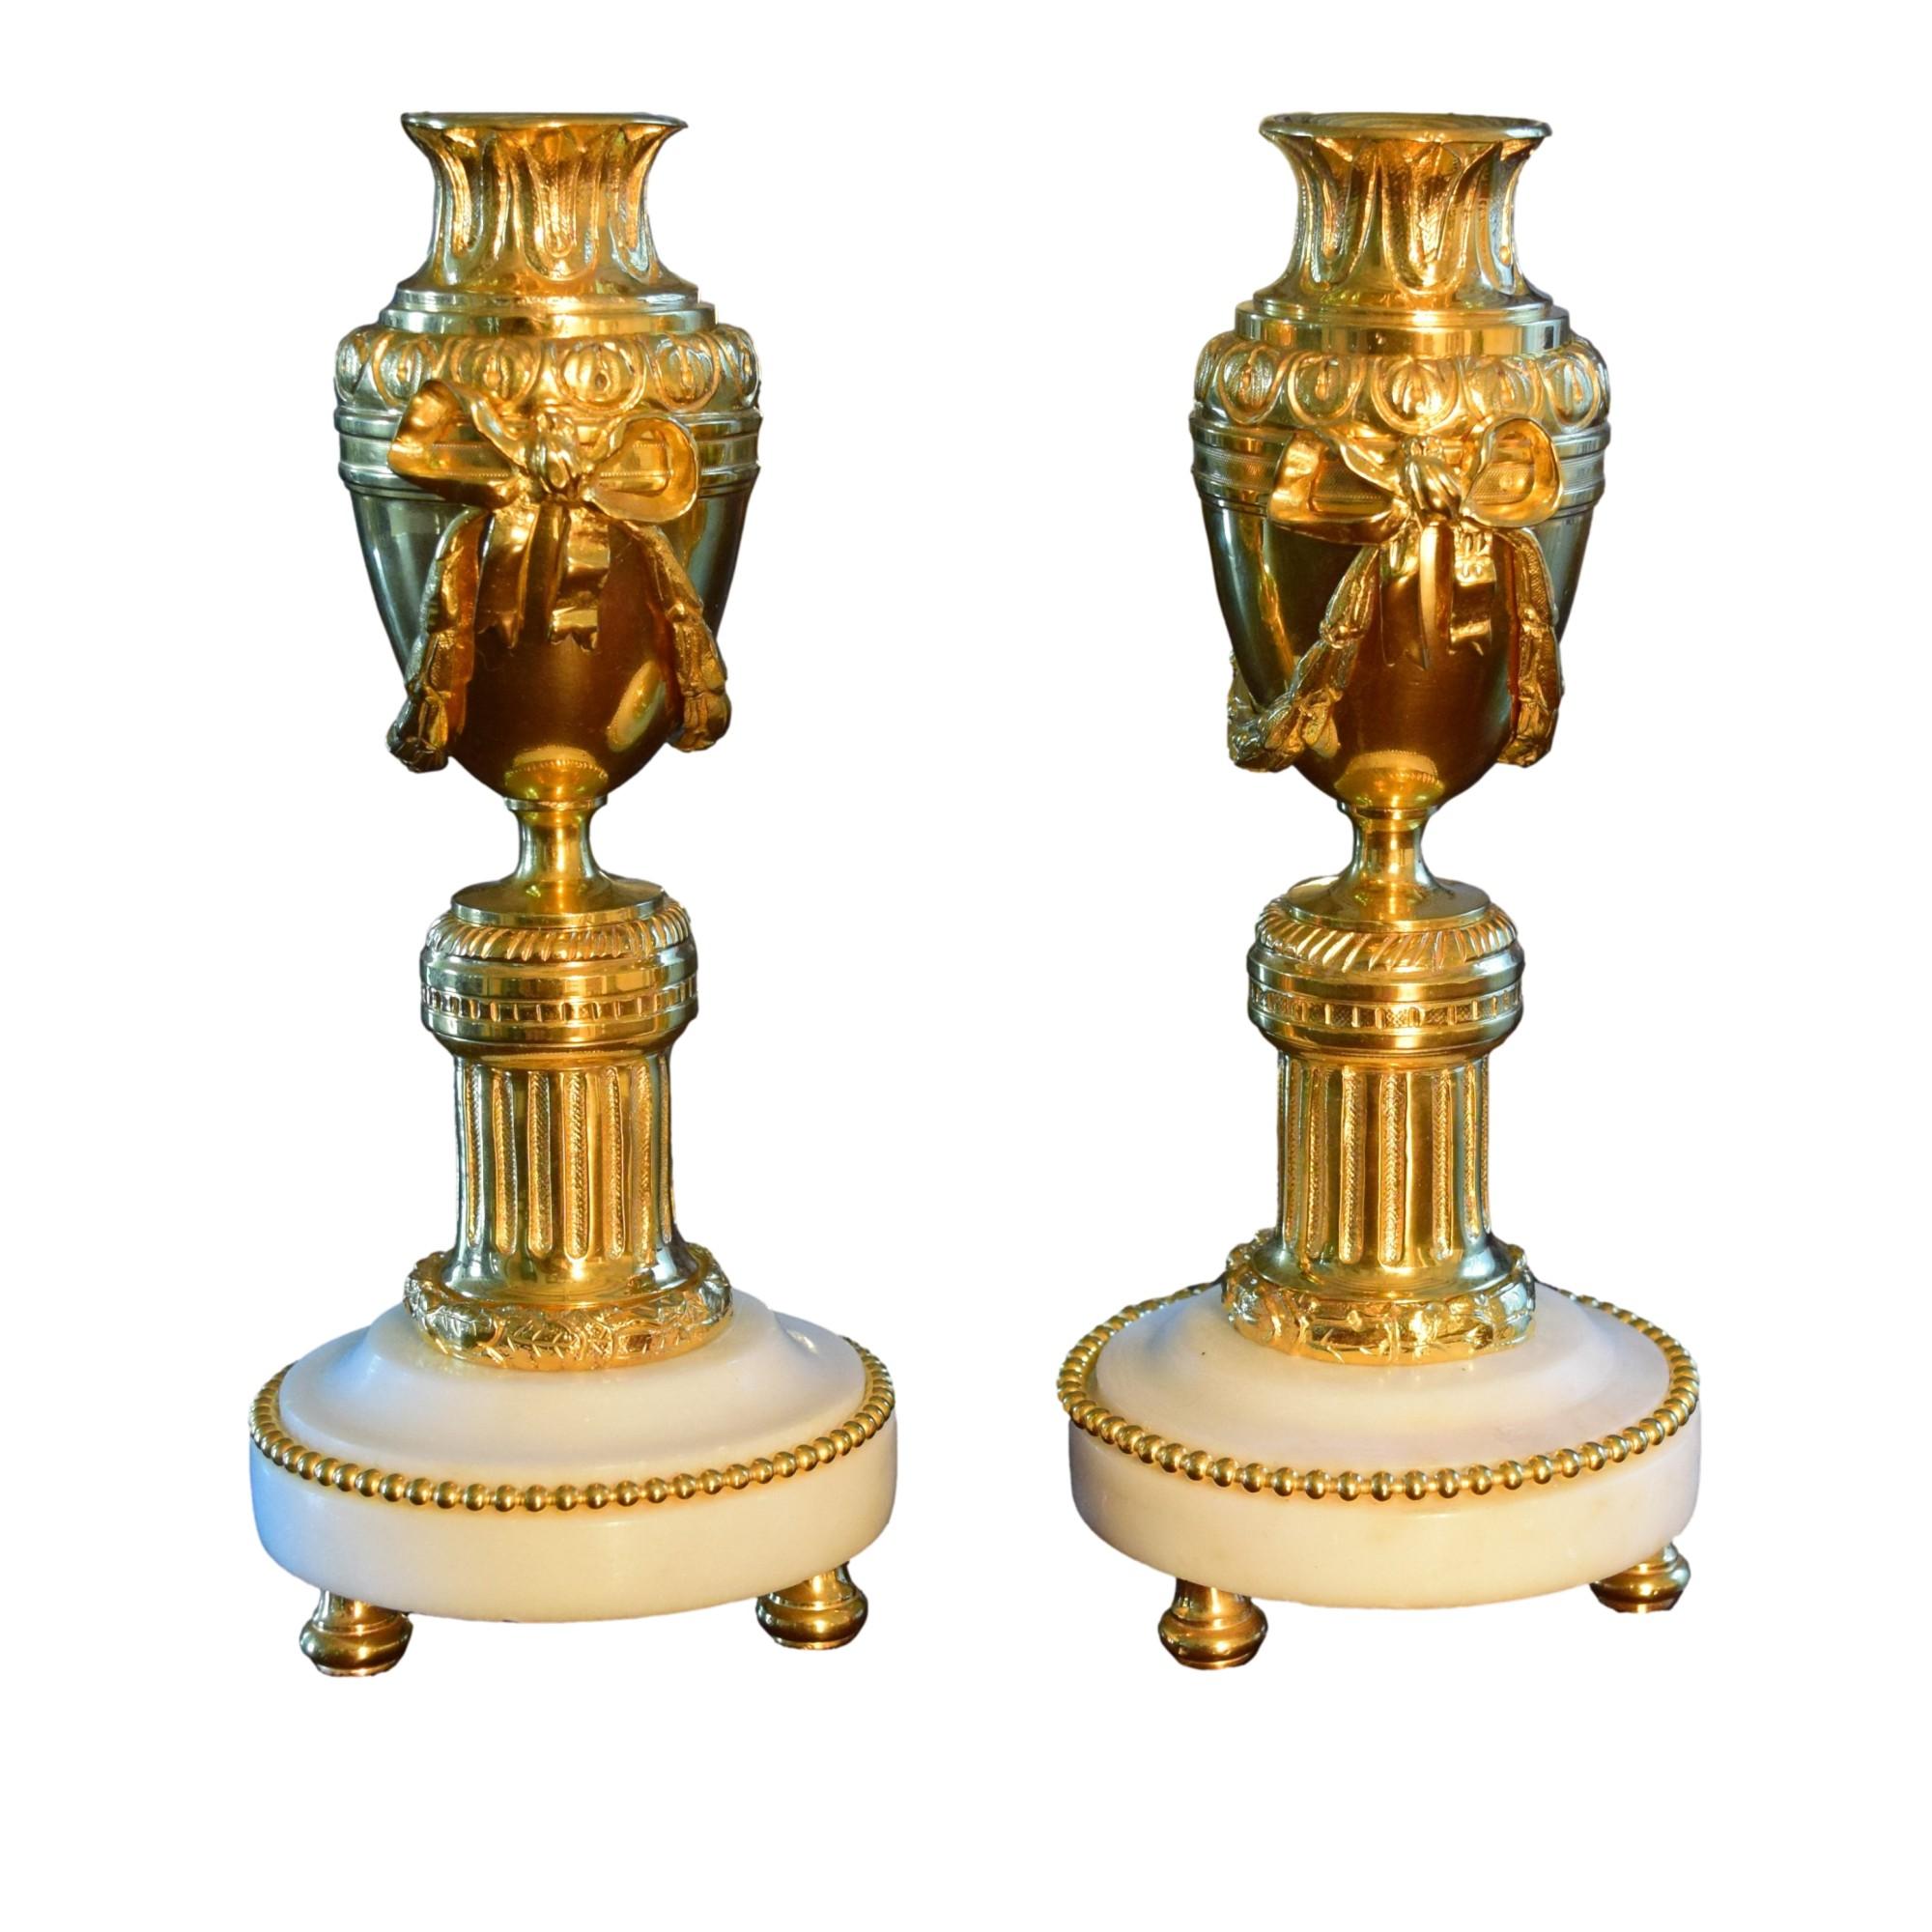 

A lovely Pair of Antique French Louis XVI Style Ormolu Cassolettes.

The two Cassolettes show a round white marble pedestal resting on spheres of gilt bronze and lined with acanthus leaves and bronze pearls.
The Body rises in the form of an